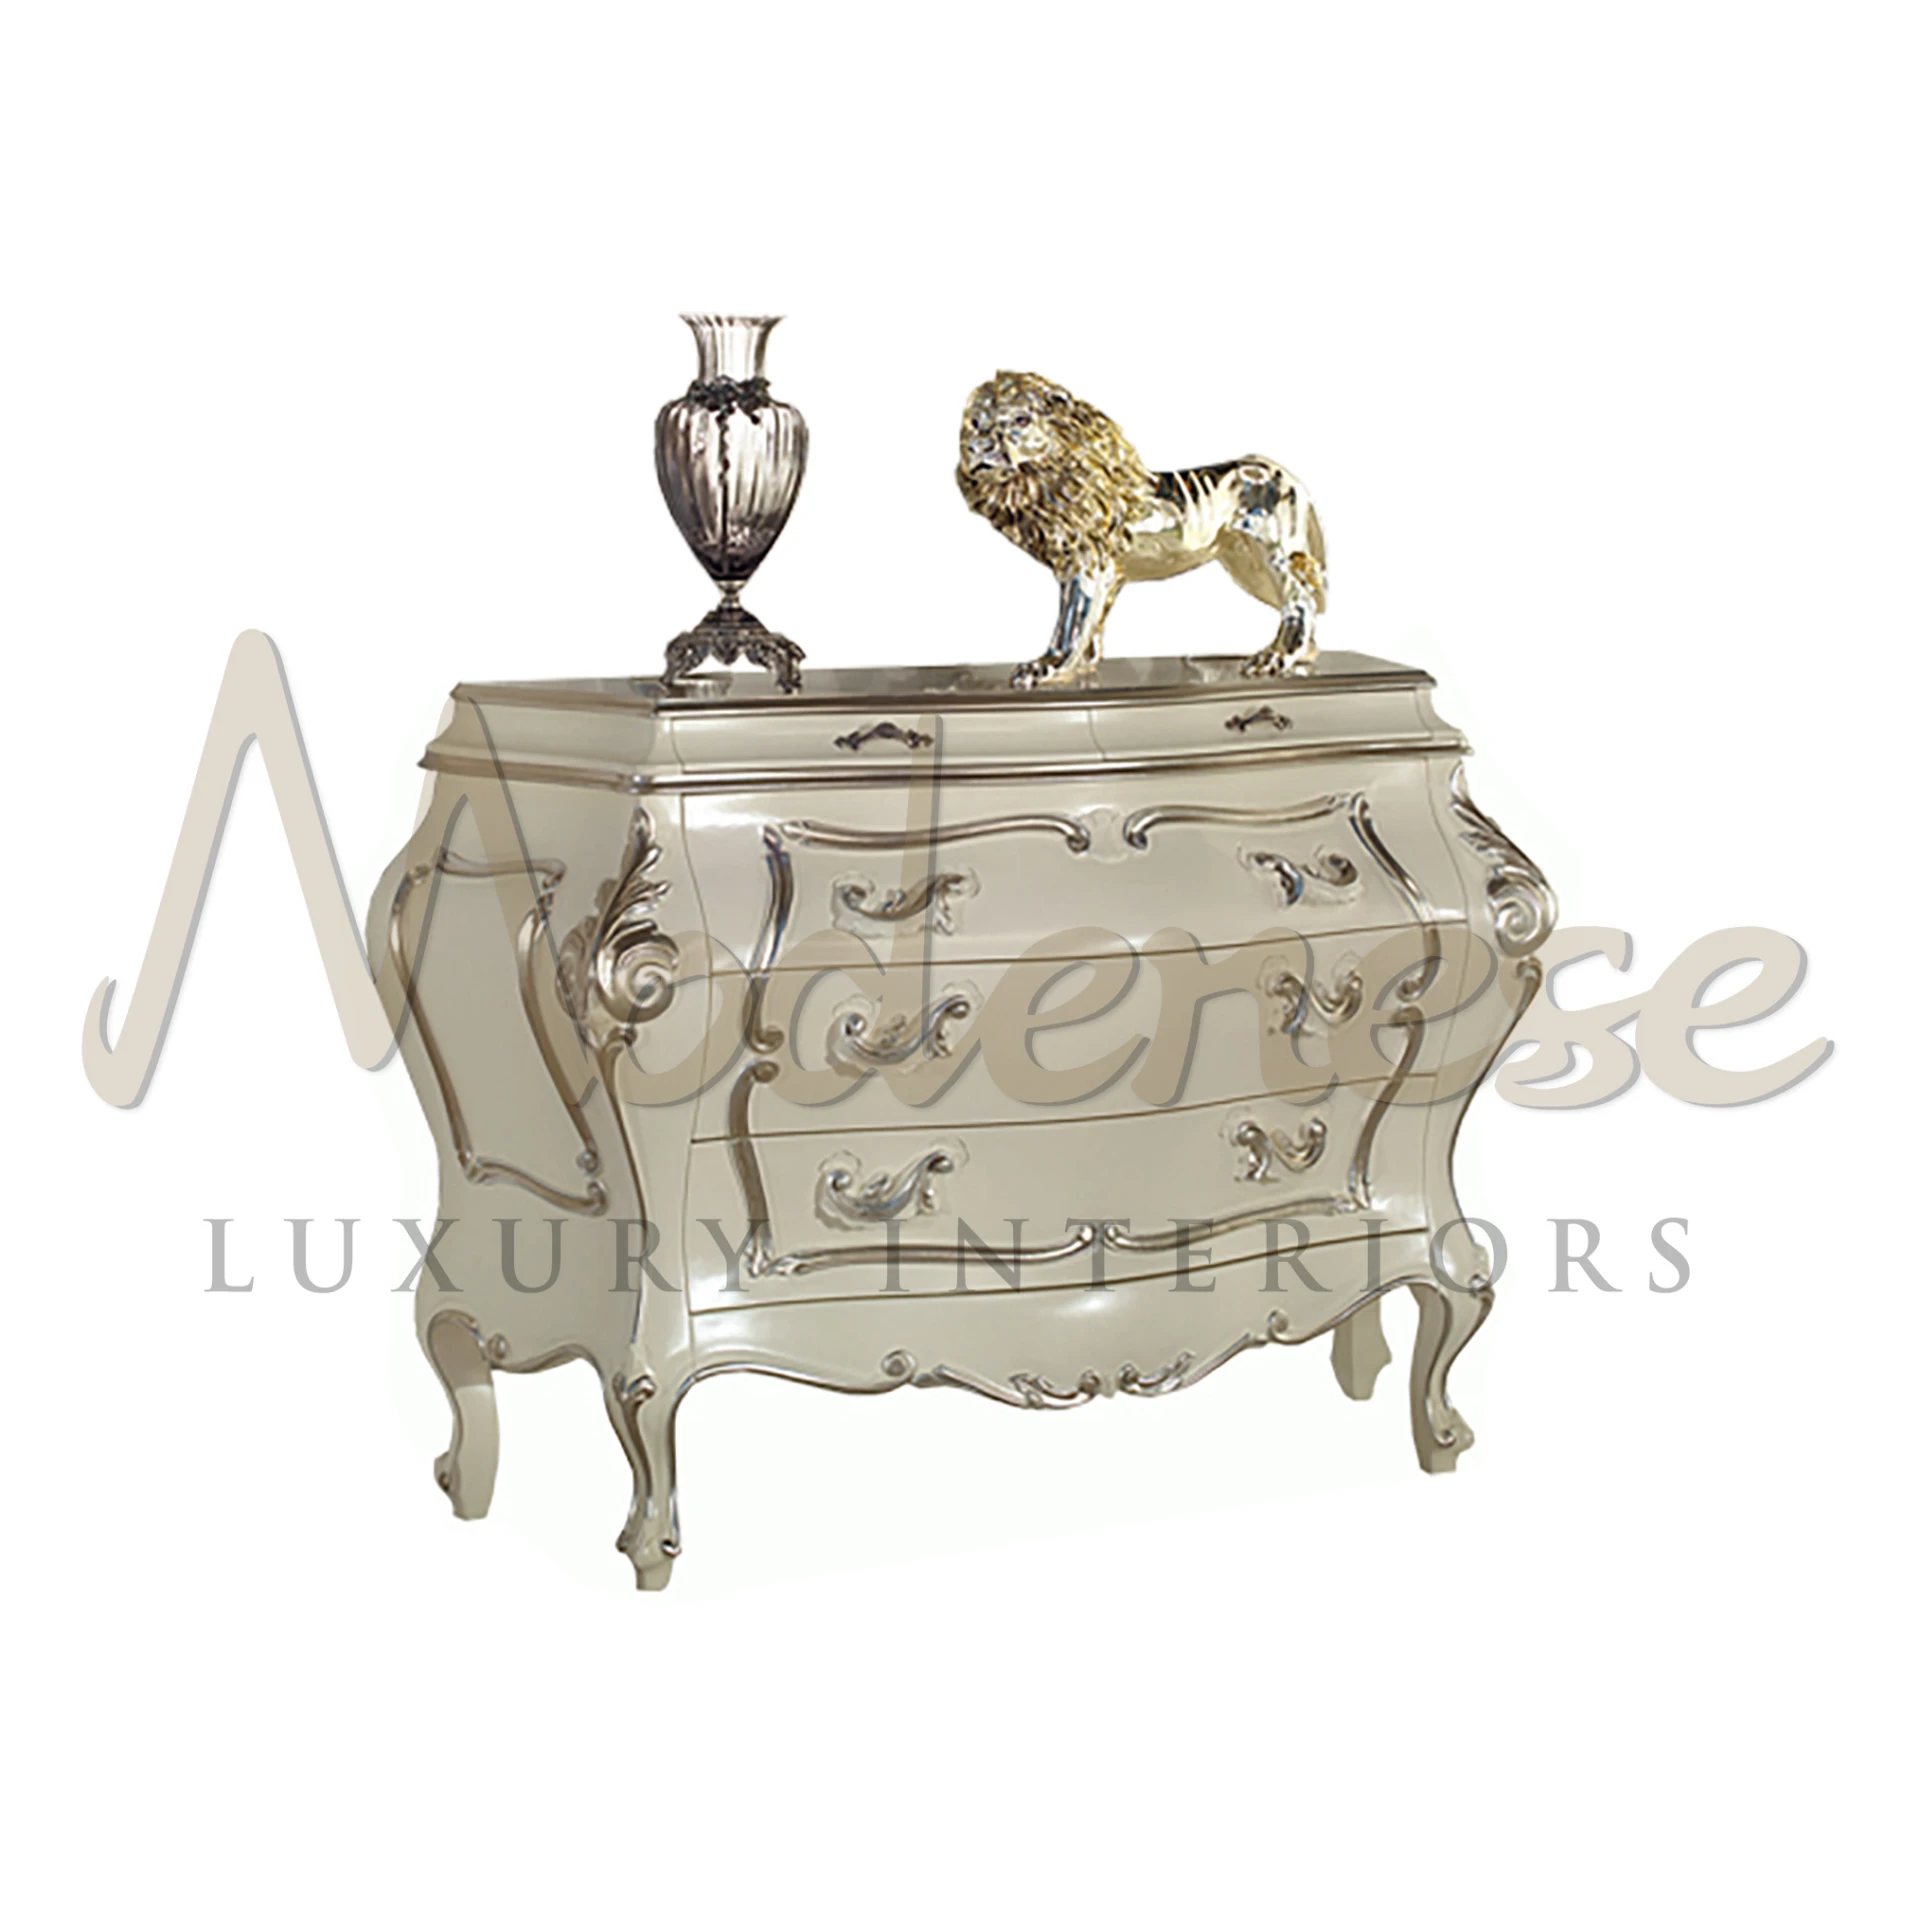 Reflective silver-finished chest of drawers with ornate detailing and sculpted legs, adorned with a decorative vase and lion figurine.